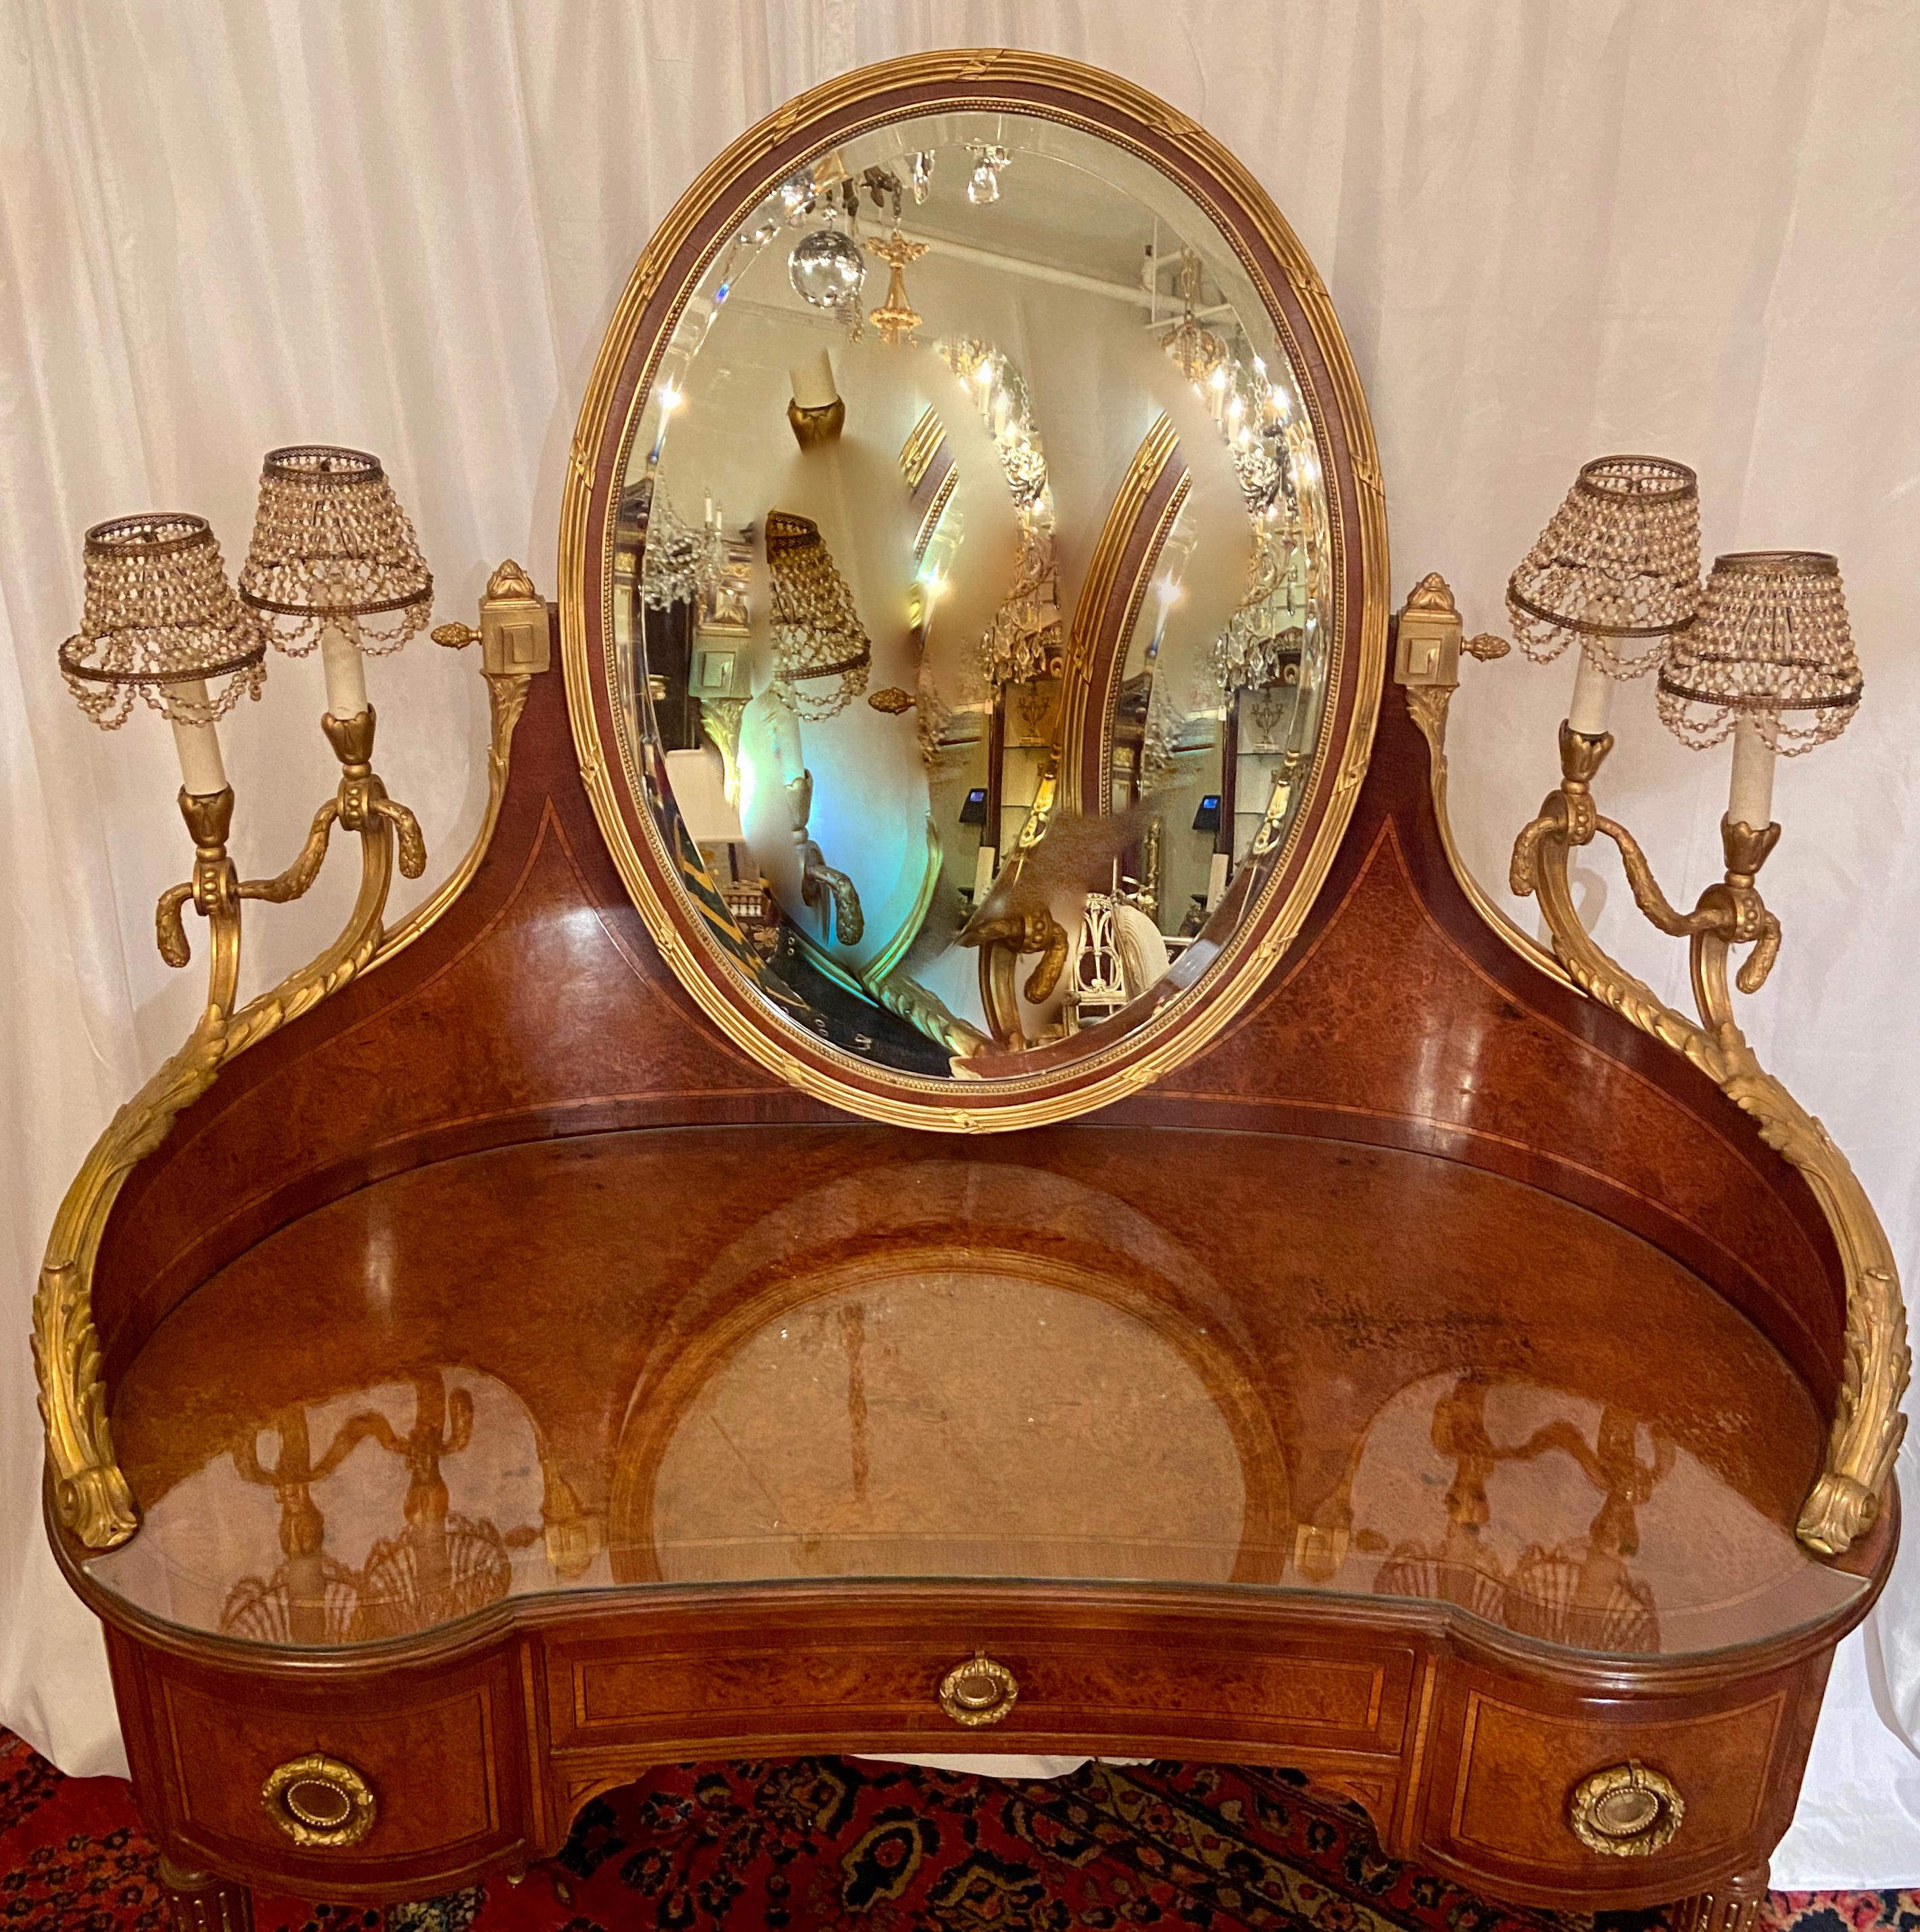 Antique French Louis XVI Bronze D' Ore and Briarwood dressing table with beaded lamps, Circa 1890.
This is a lovely dressing table with four small lights on either side. It is elegant and reflective of the nice French designs of the period.